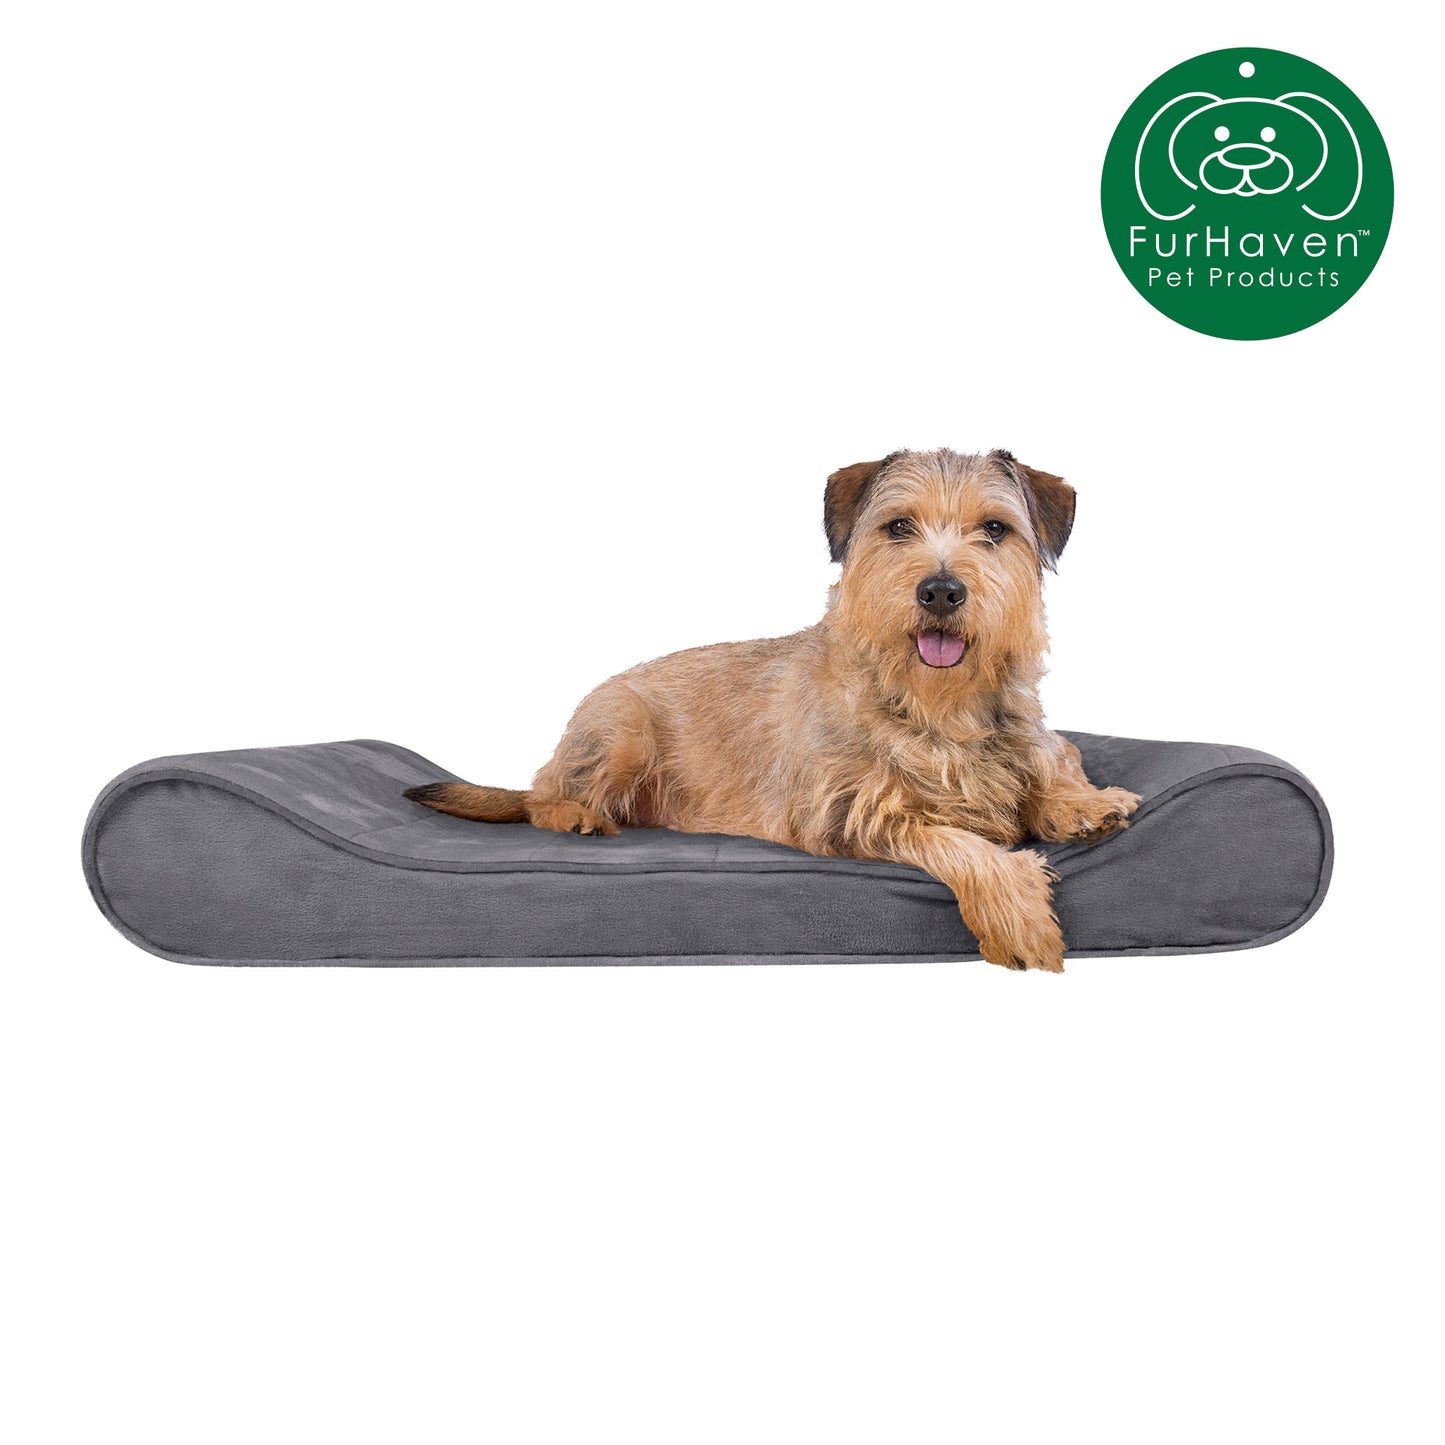 FurHaven Orthopedic Microvelvet Luxe Lounger Pet Bed